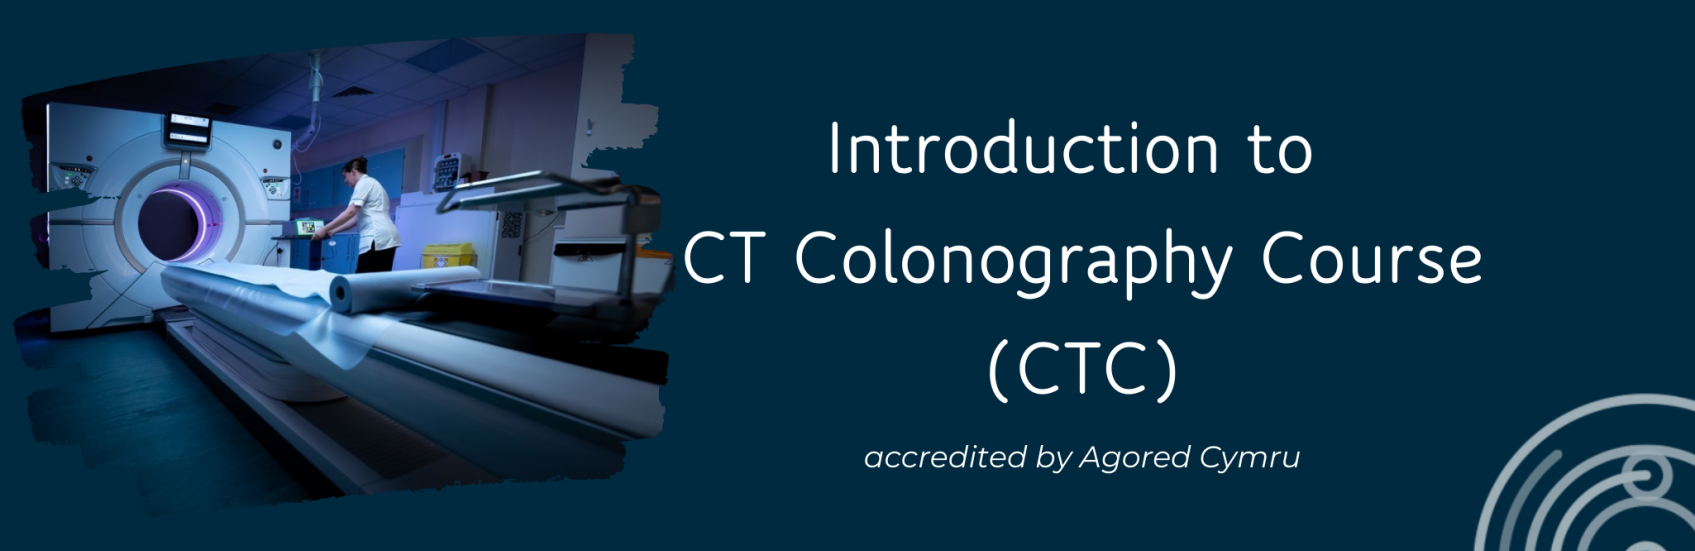 CT Colonography Course